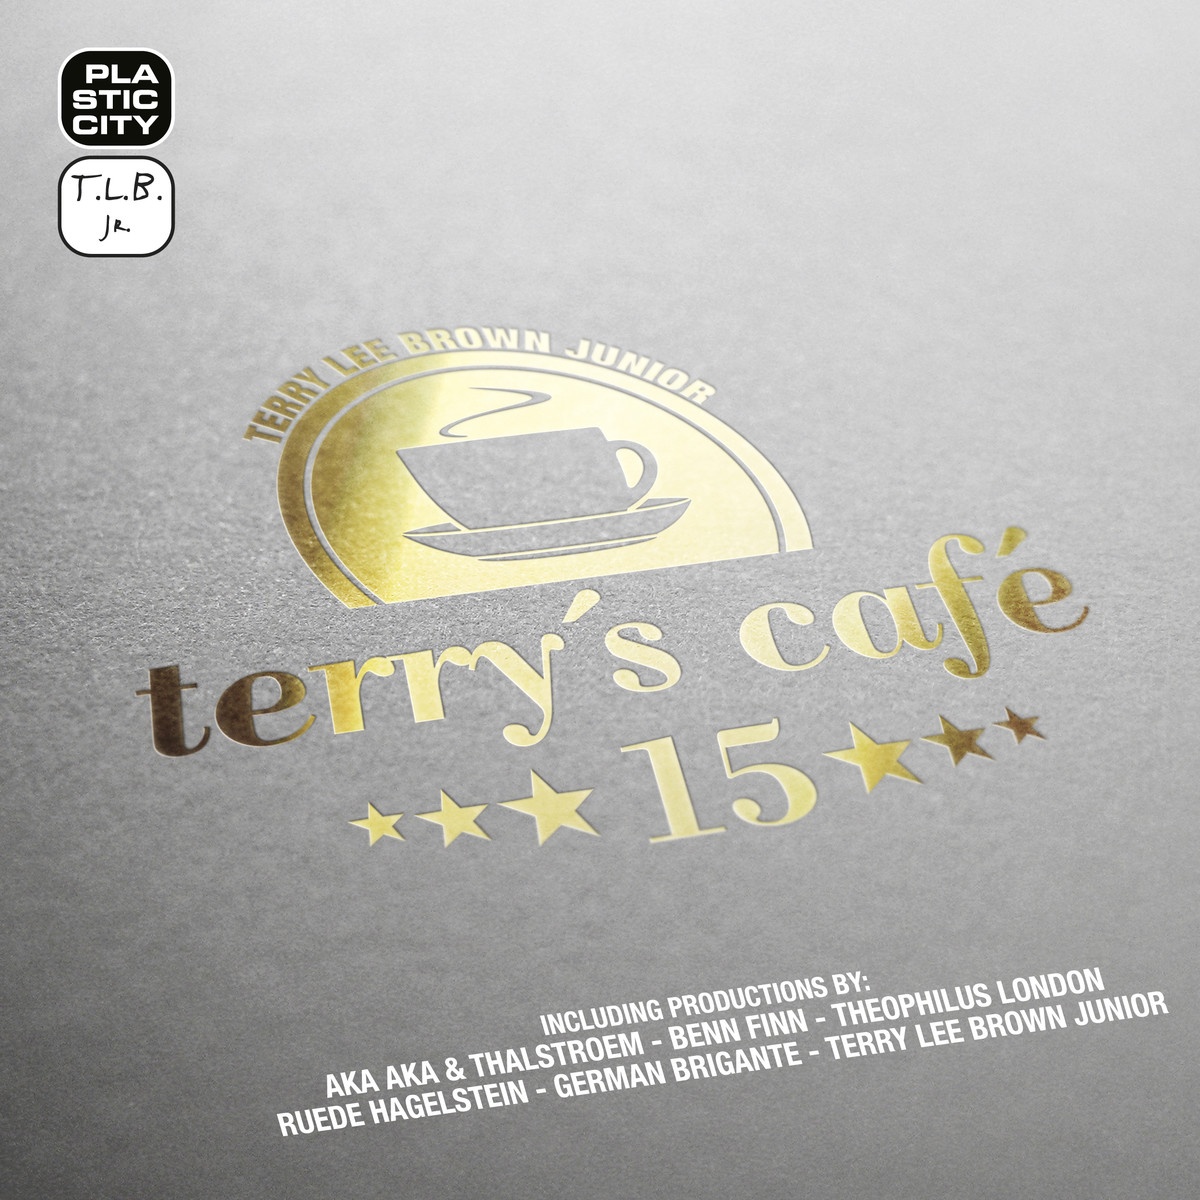 Terry' s Cafe 15